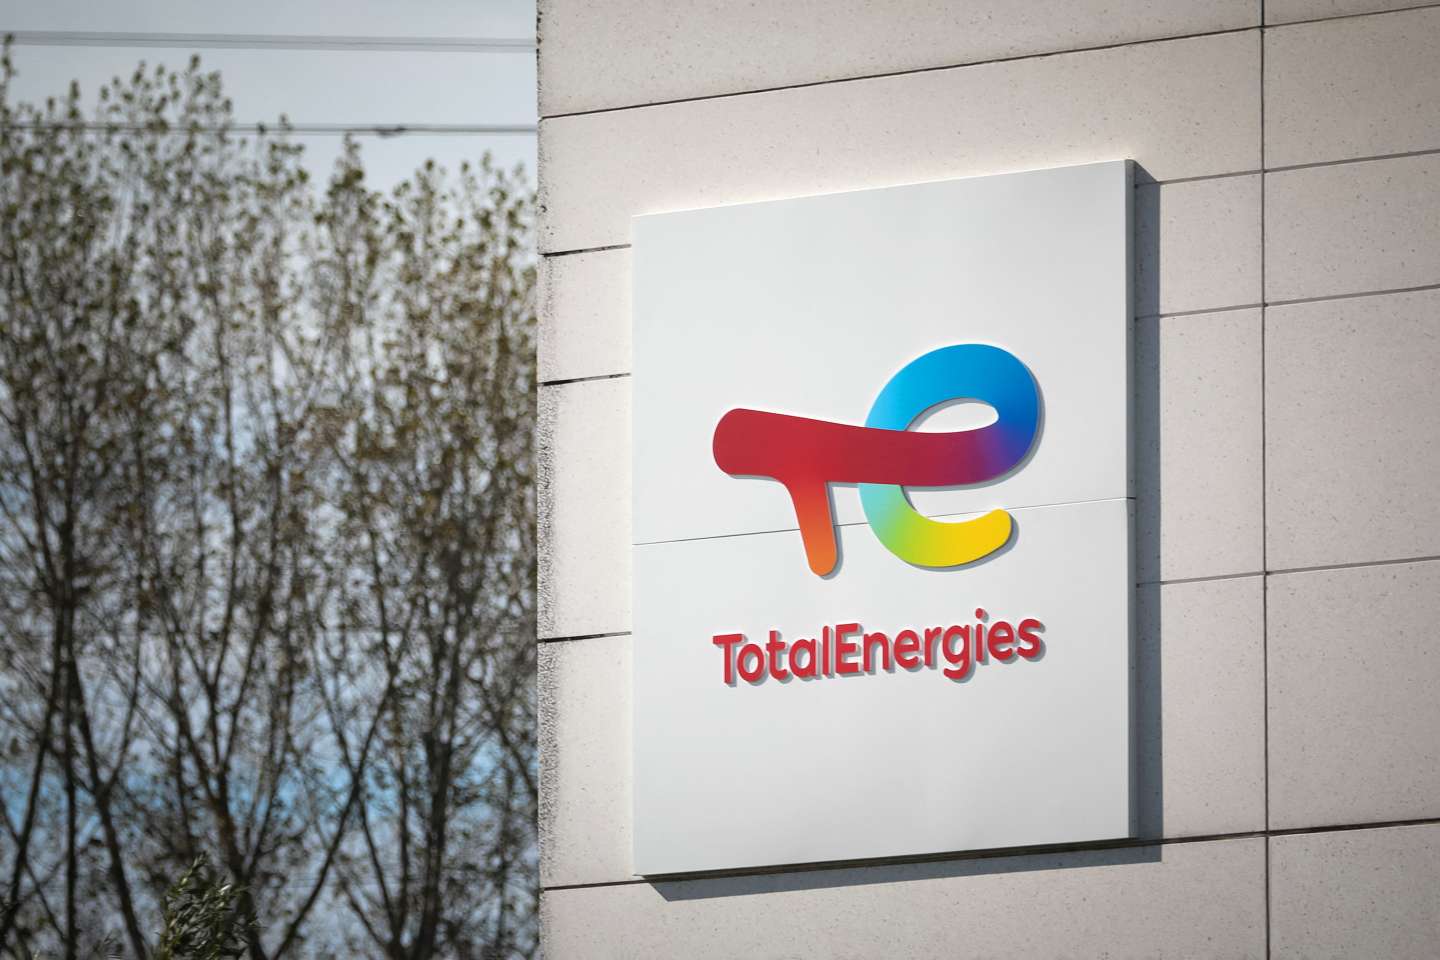 TotalEnergies announces shedding 1,600 service stations in Europe to prepare for the end of thermal power in 2035